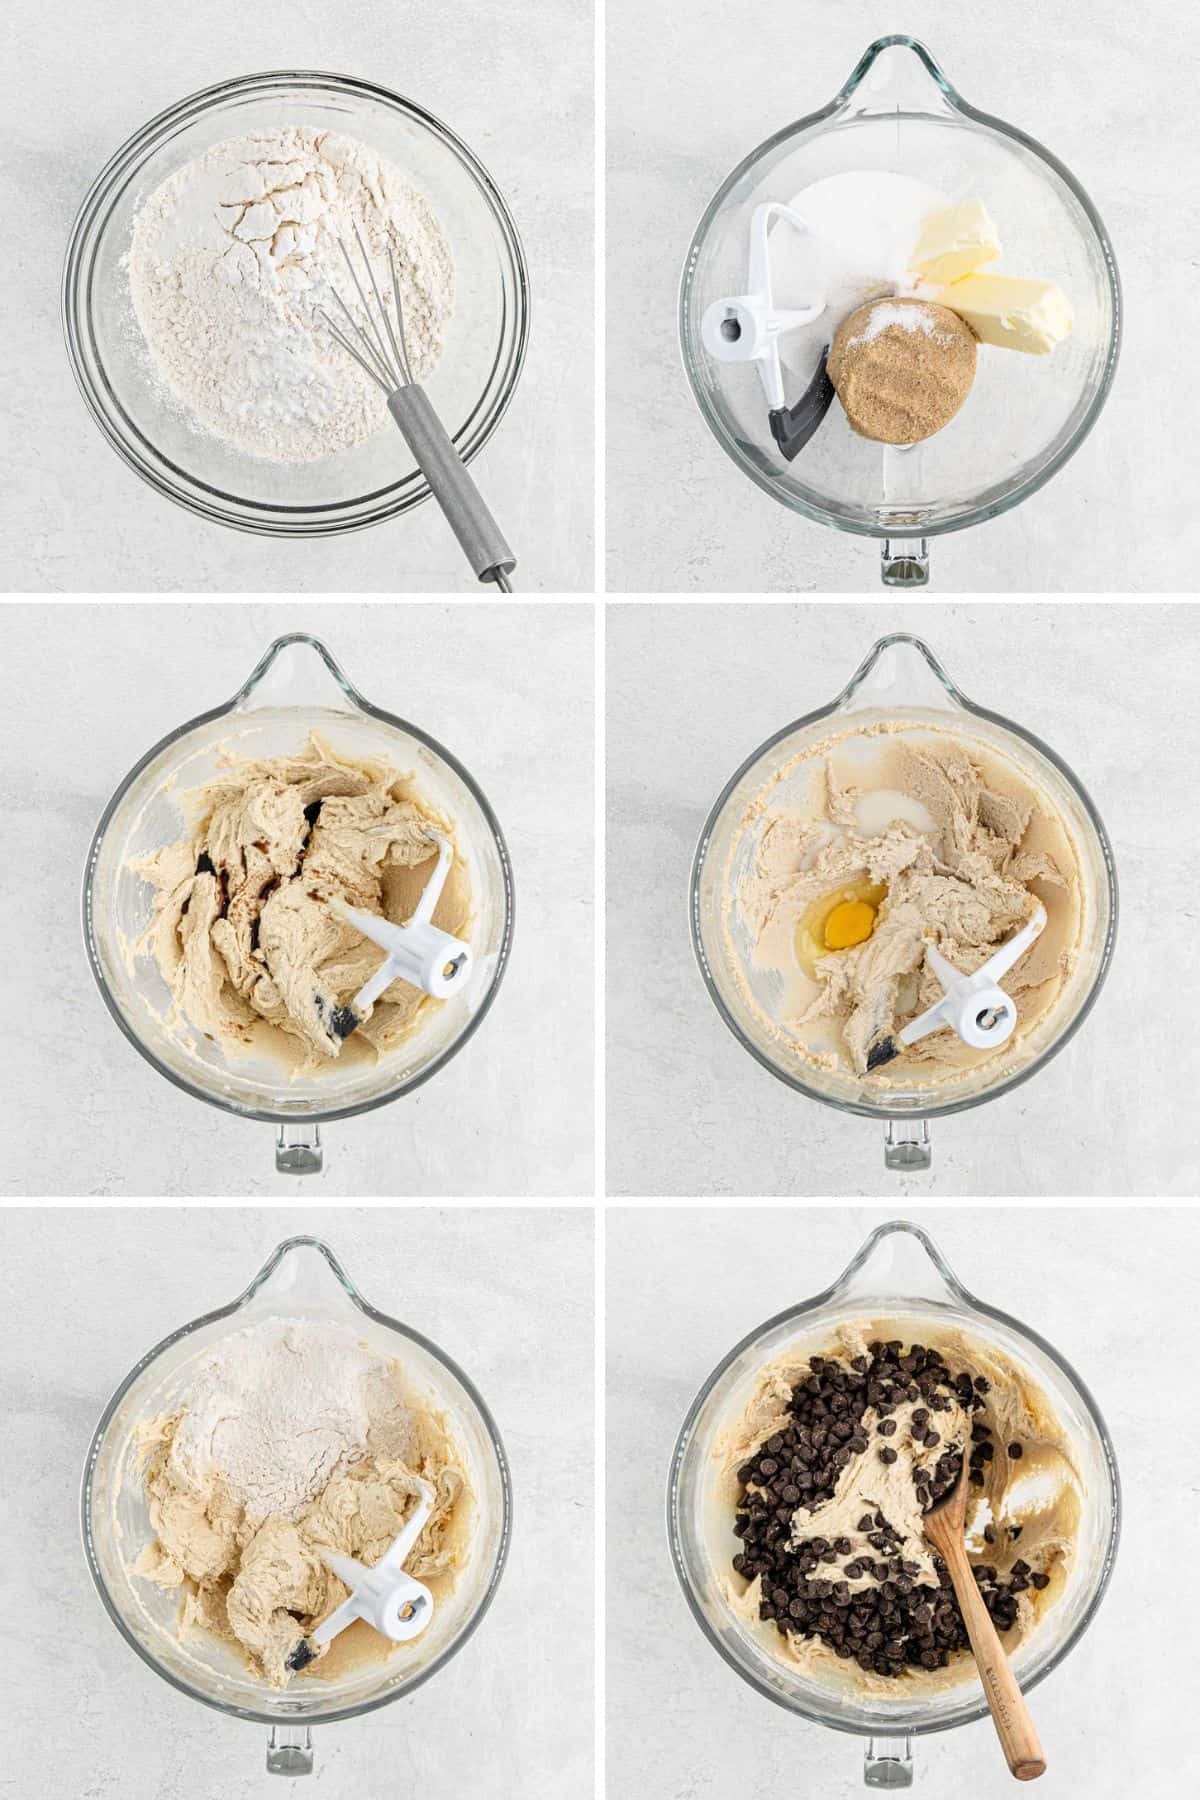 A collage of images showing the steps for mixing up the crispy cookie dough from mixing the flour, creaming the sugar, to combing them together and adding the chips.